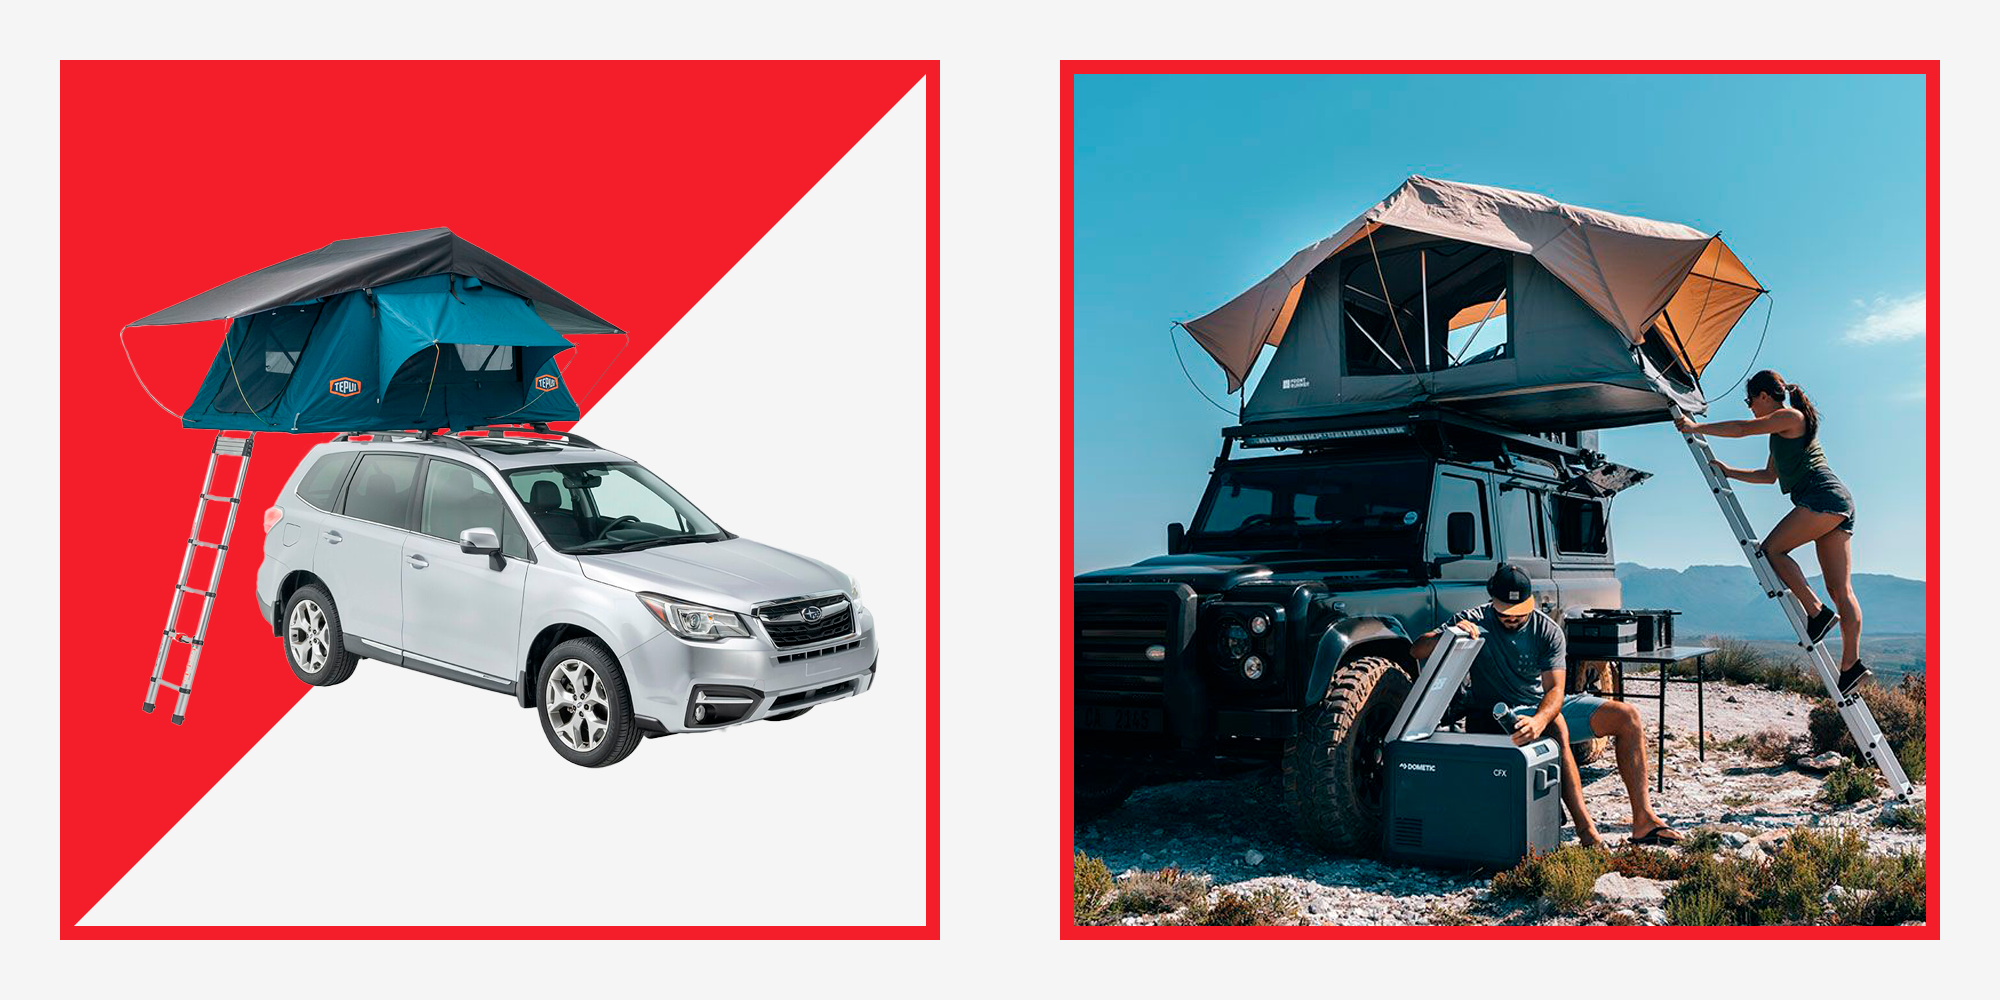 https://hips.hearstapps.com/hmg-prod/images/mh-4-15-roof-tents-1650035669.png